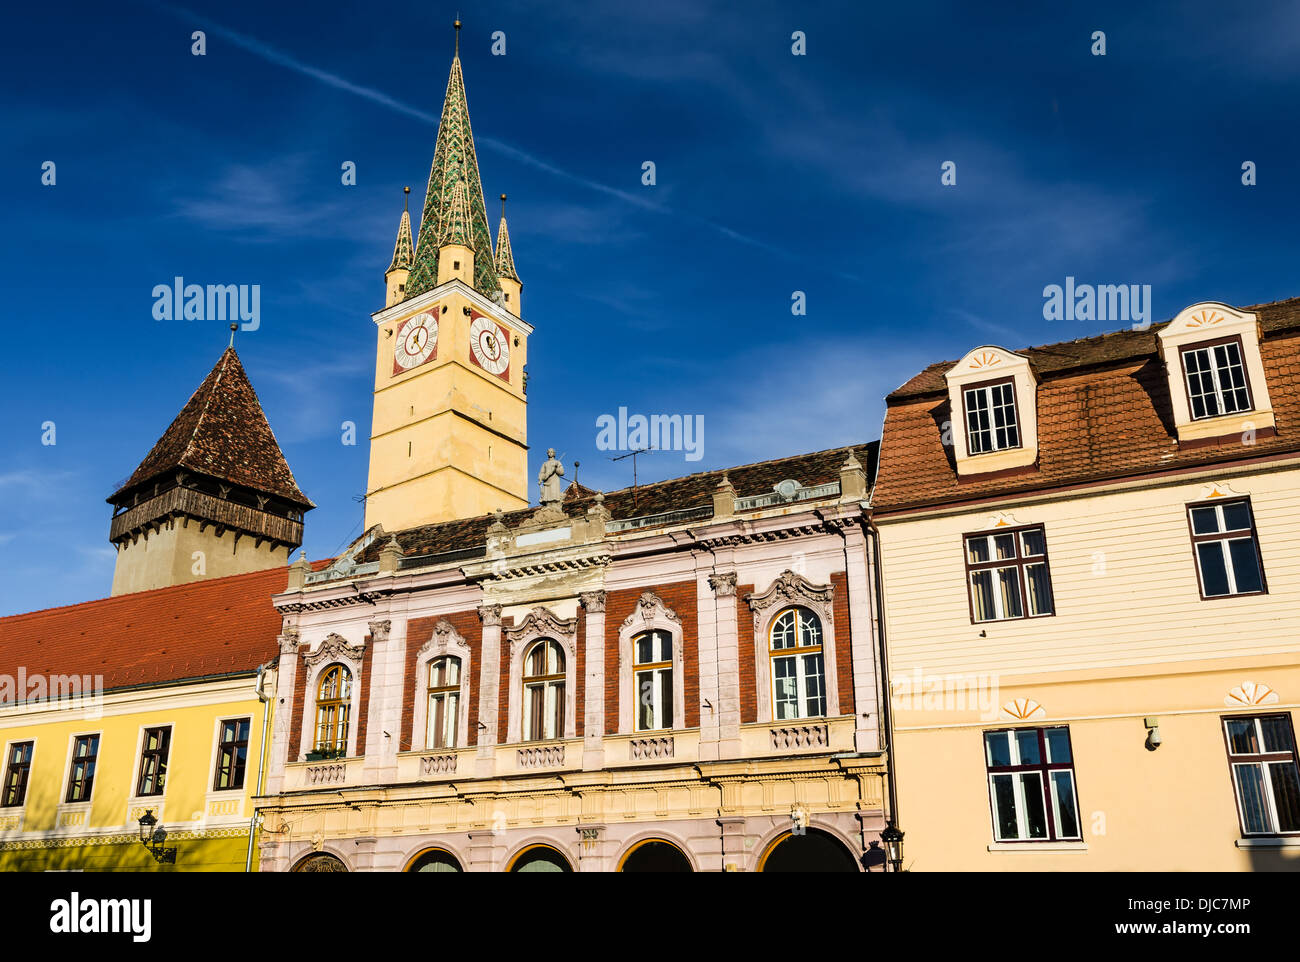 Medias, Transylvania. One of the best preserved historical centers in Romania. Medieval tower of Buglers. Stock Photo